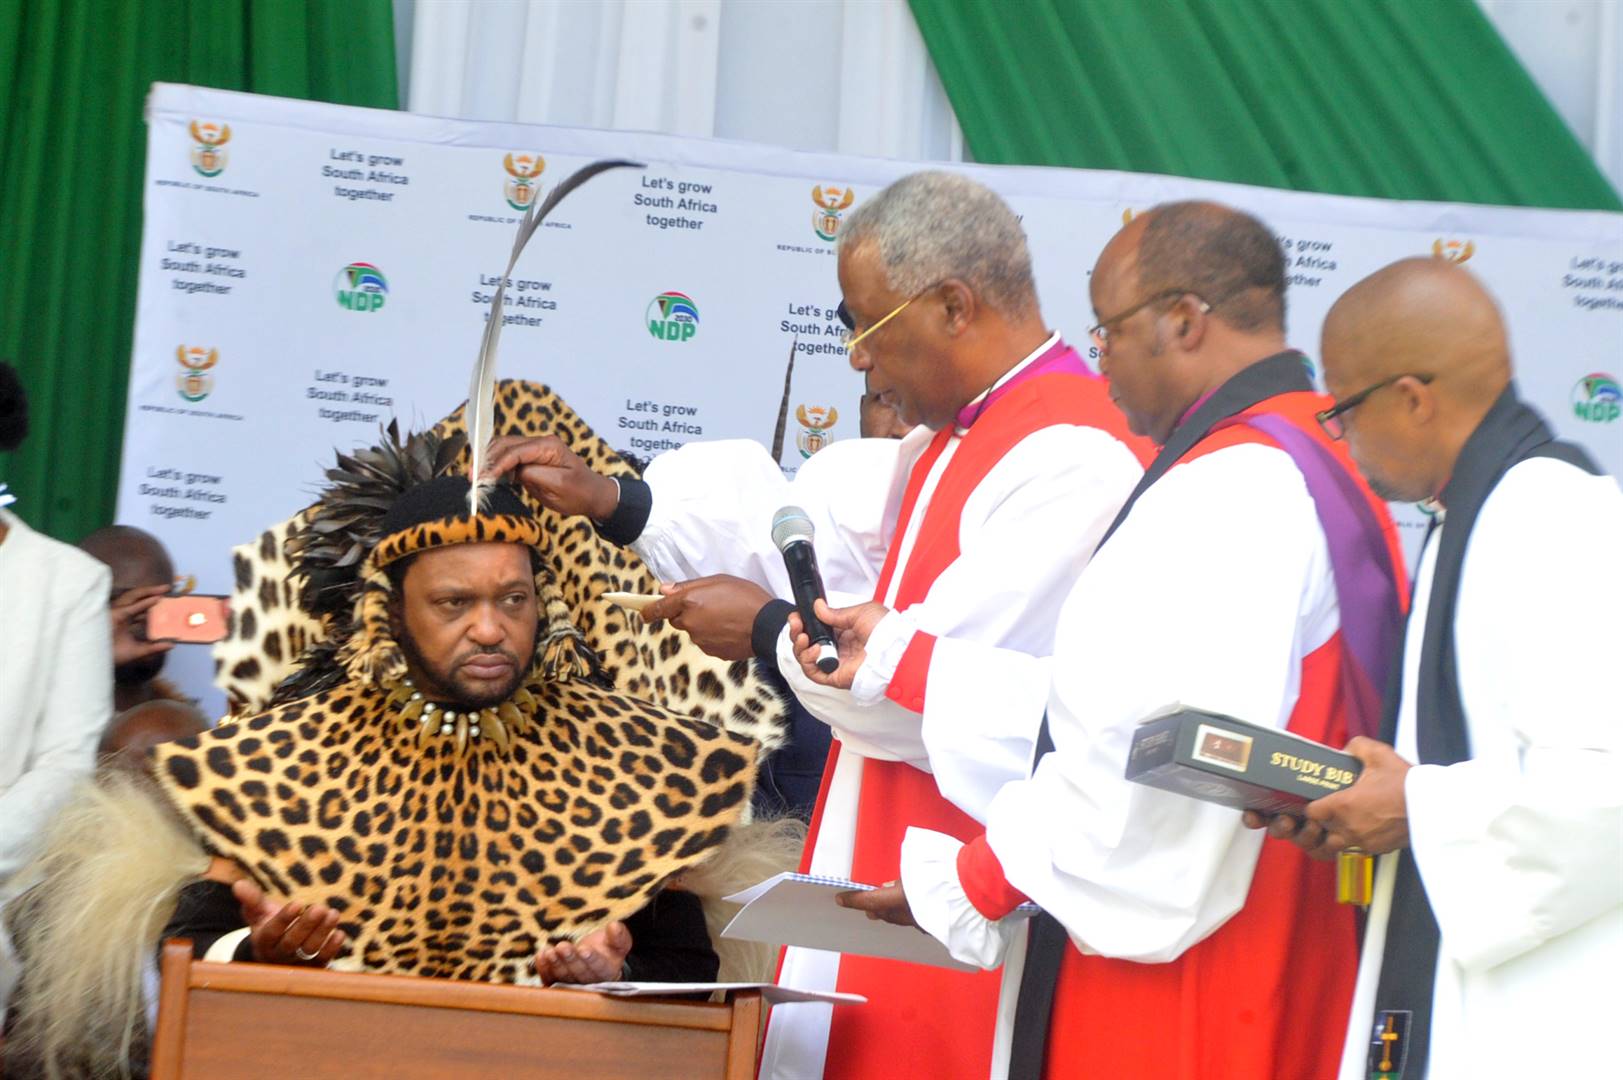 Archbishop Thabo Makgoba anoints King Misuzulu with oil during the handing over of his certificate at Moses Mabhida Stadium, KZN, at the weekend. Photo by Jabulani Langa